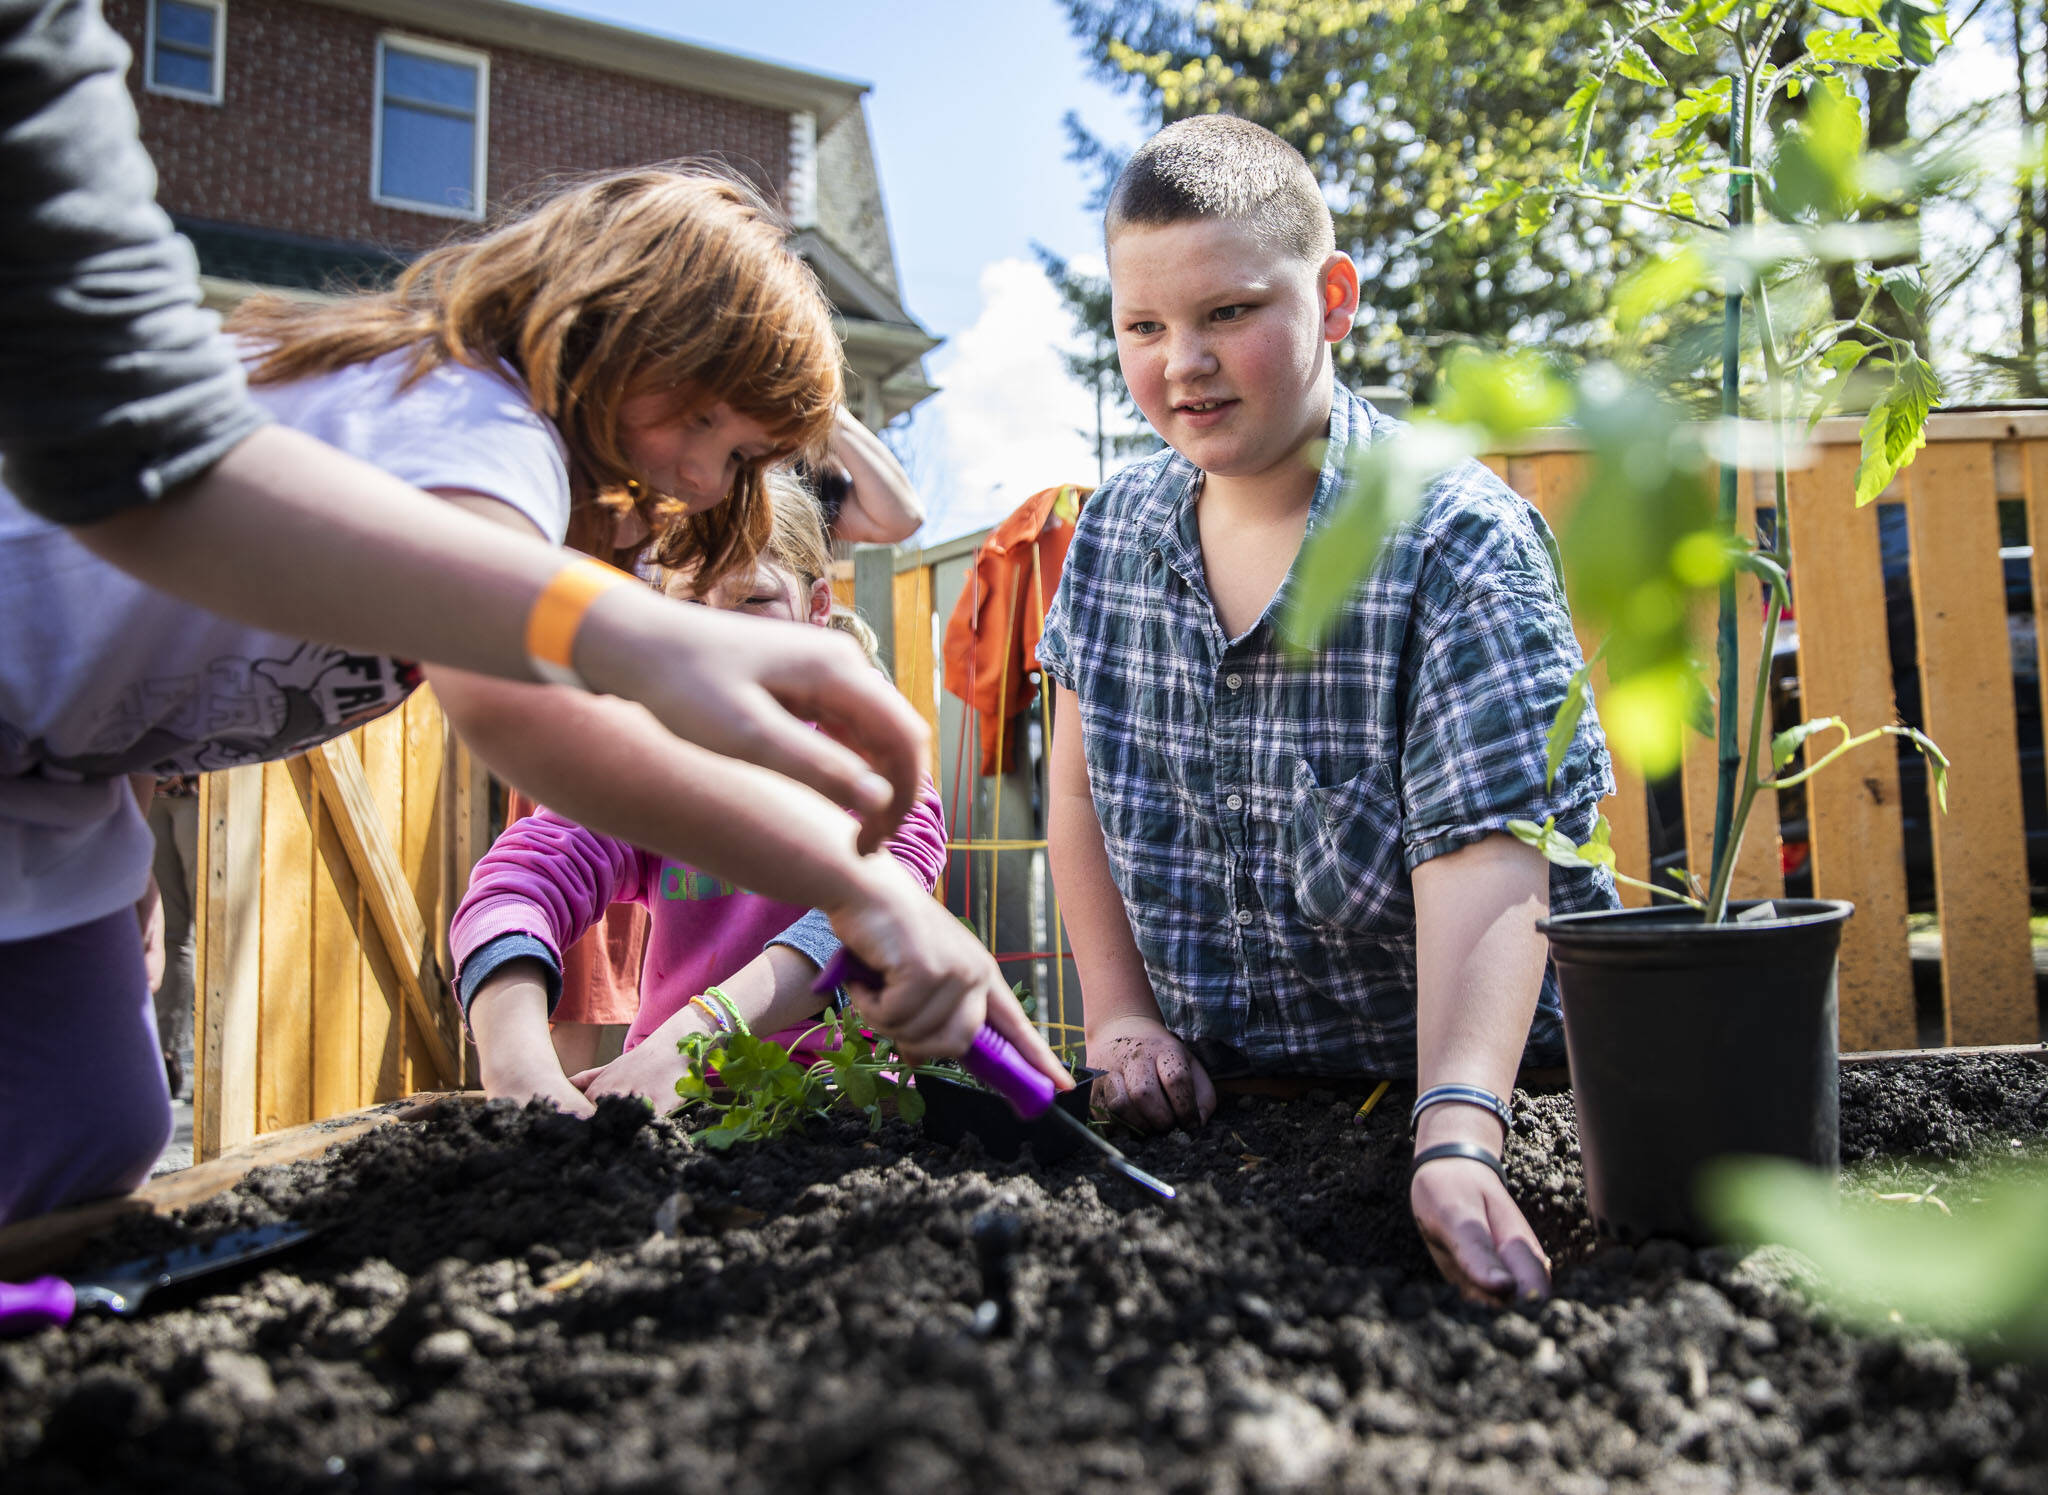 JR Stalkfleet (left) digs a hole for a tomato plant in the new outdoor classroom at Tomorrow’s Hope Child Development Center on April 22 in Everett. (Olivia Vanni / The Herald)